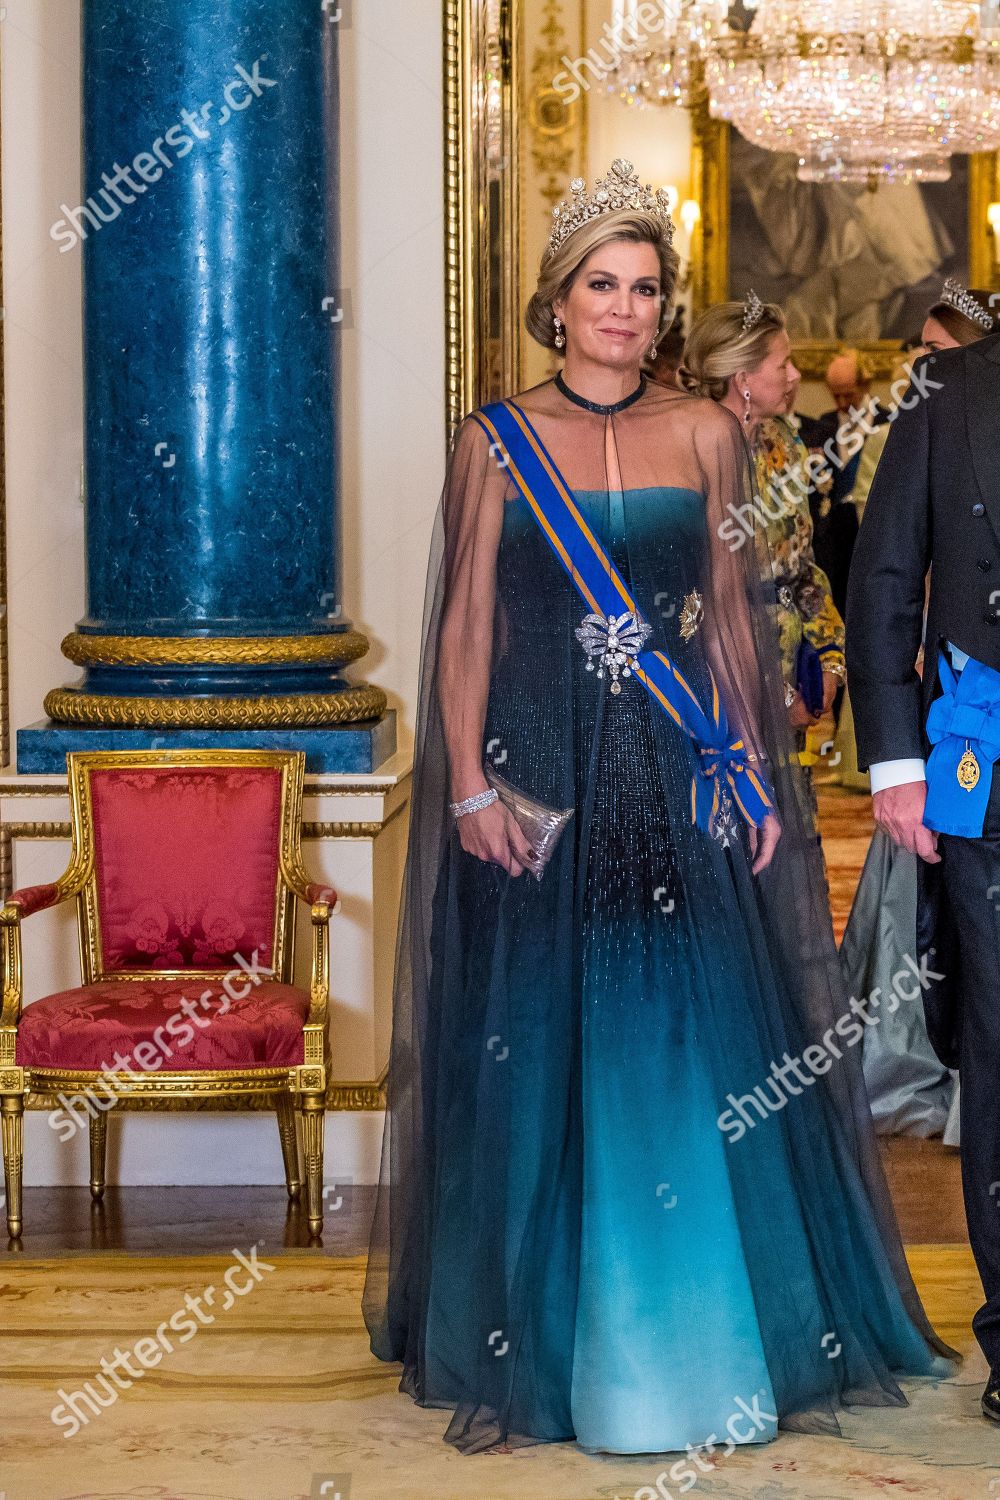 state-visit-of-the-king-and-queen-of-the-netherlands-london-uk-shutterstock-editorial-9942632aq.jpg